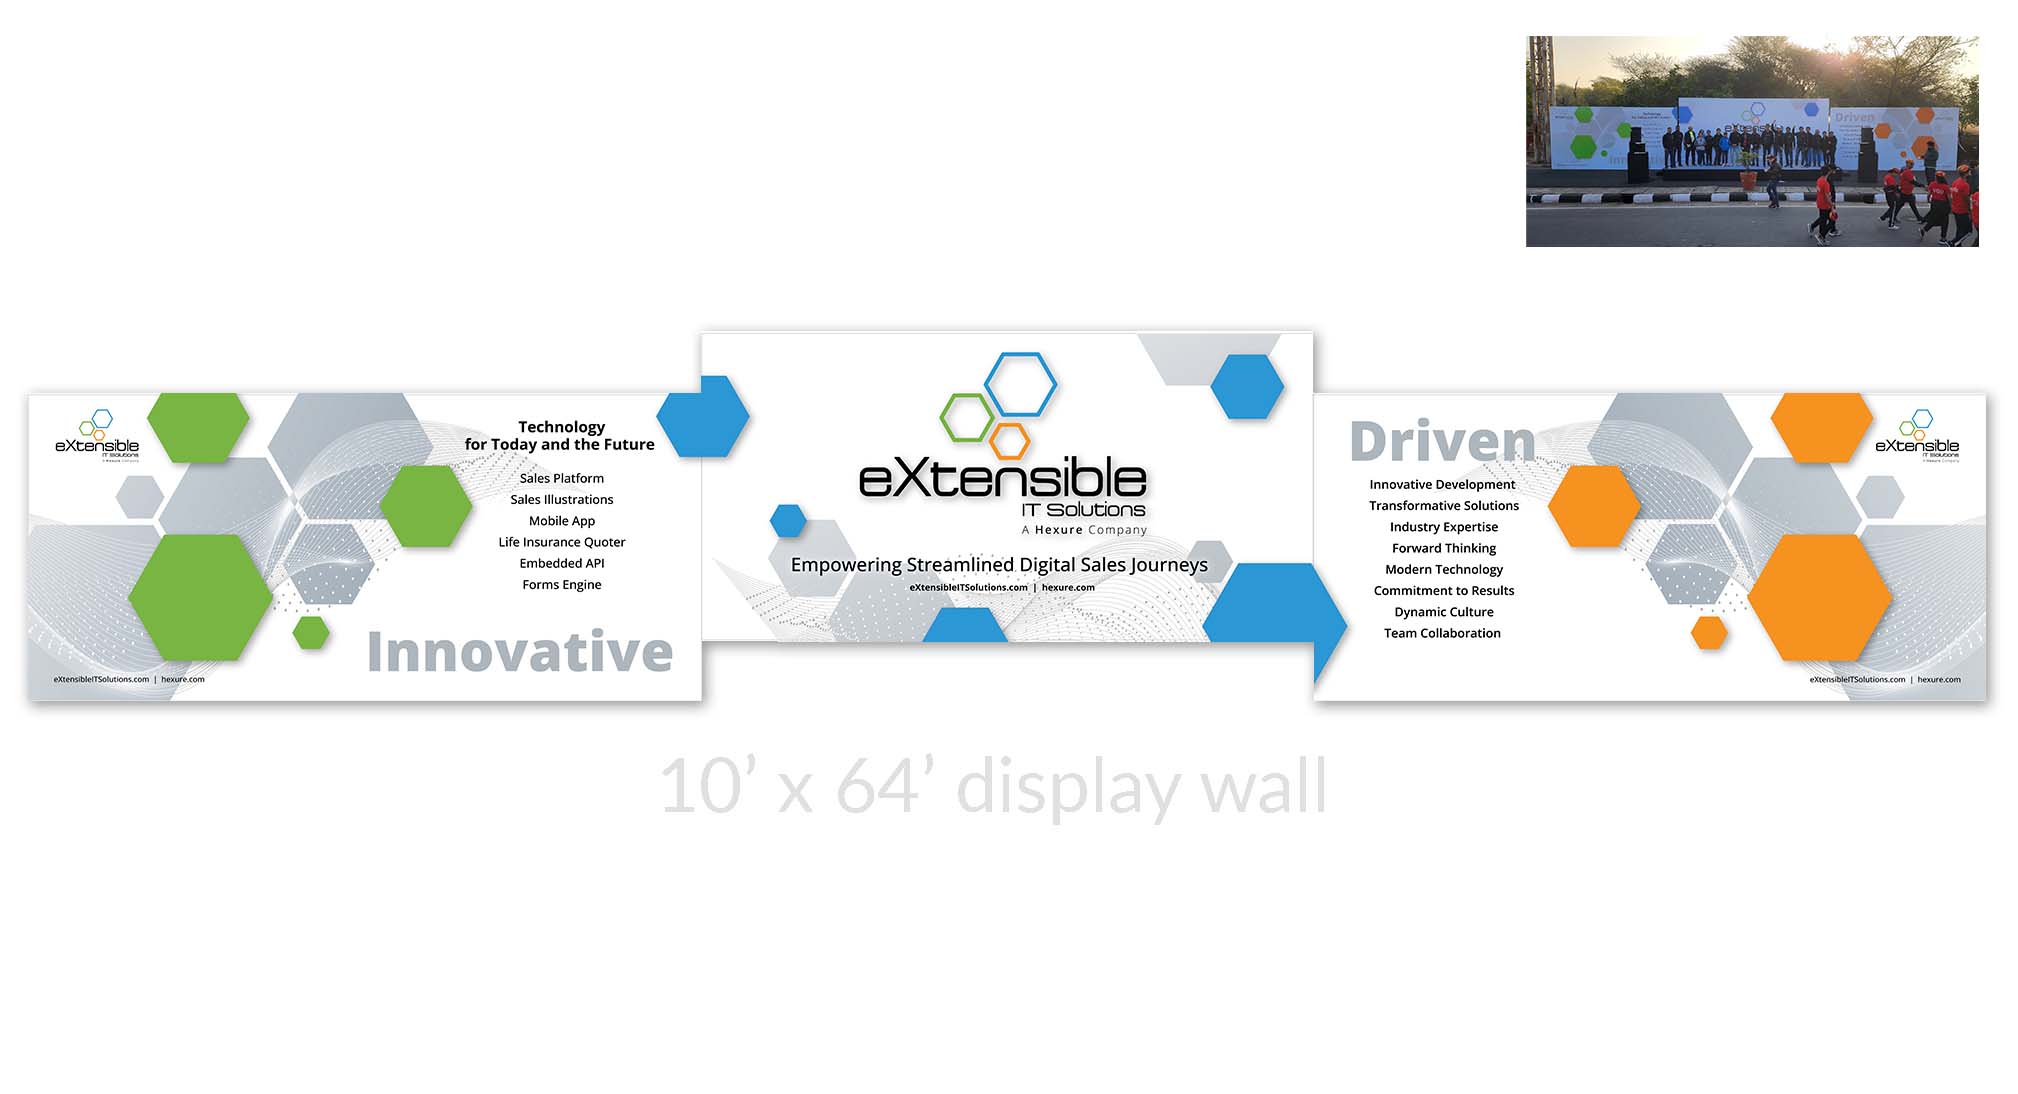 eXtensible IT Solutions 10' x 64' display wall full view